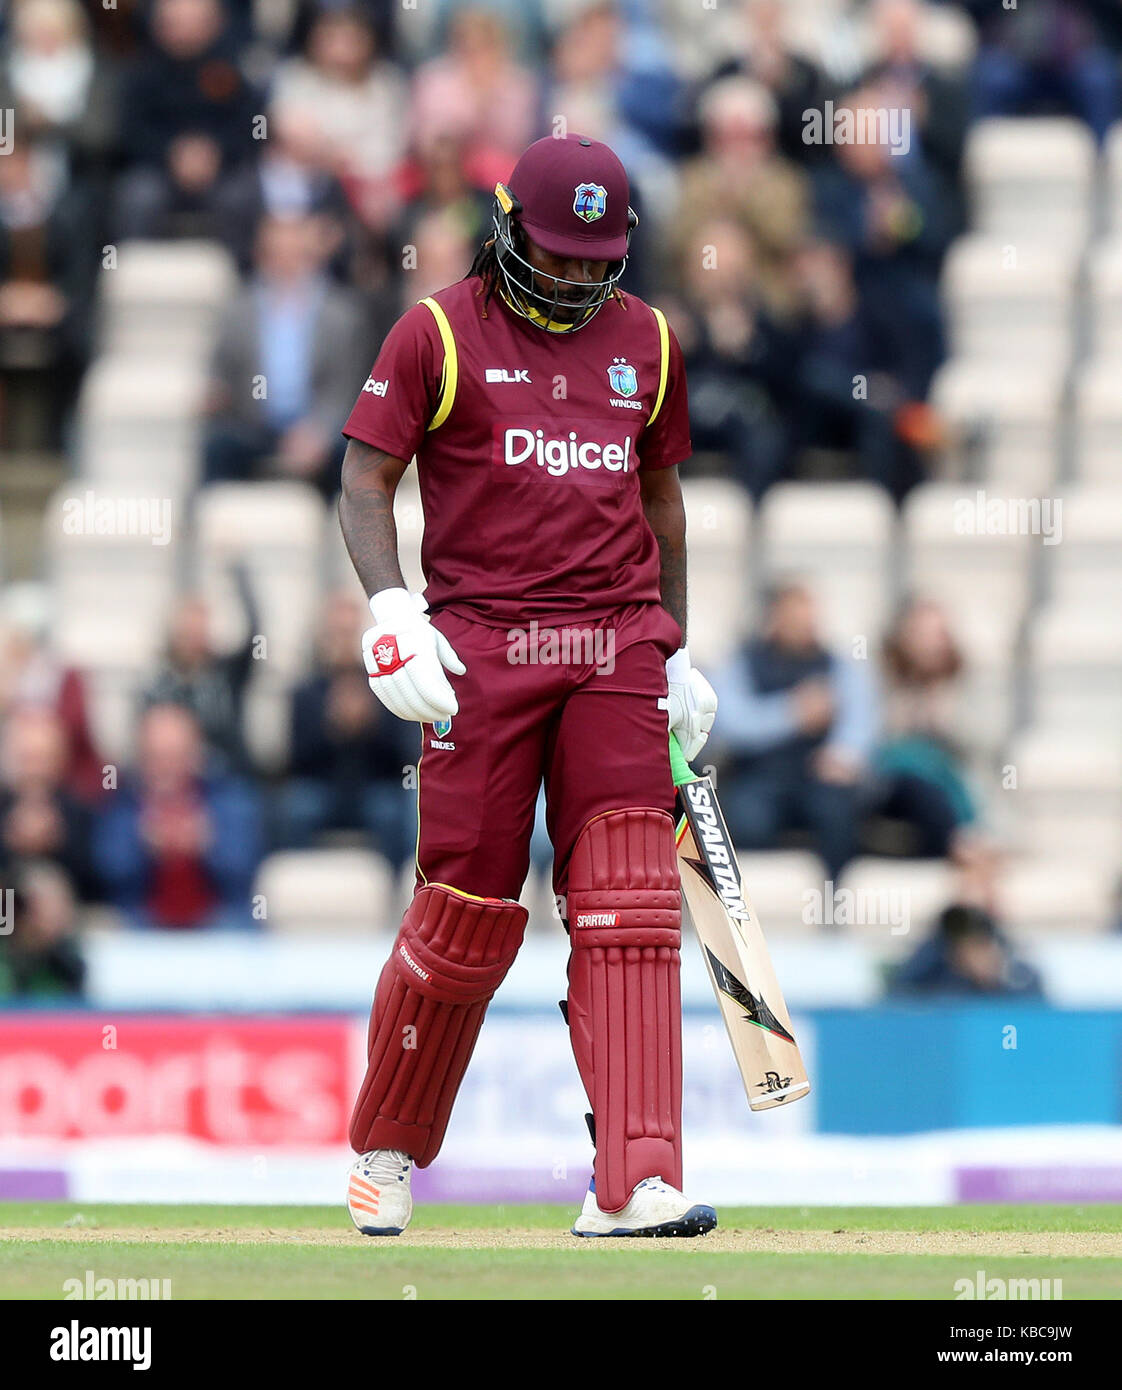 West Indies' Chris Gayle walks off after being dismissed by England's Tom Curran (not pictured) during the fifth Royal London One Day International at the Ageas Bowl, Southampton. Stock Photo